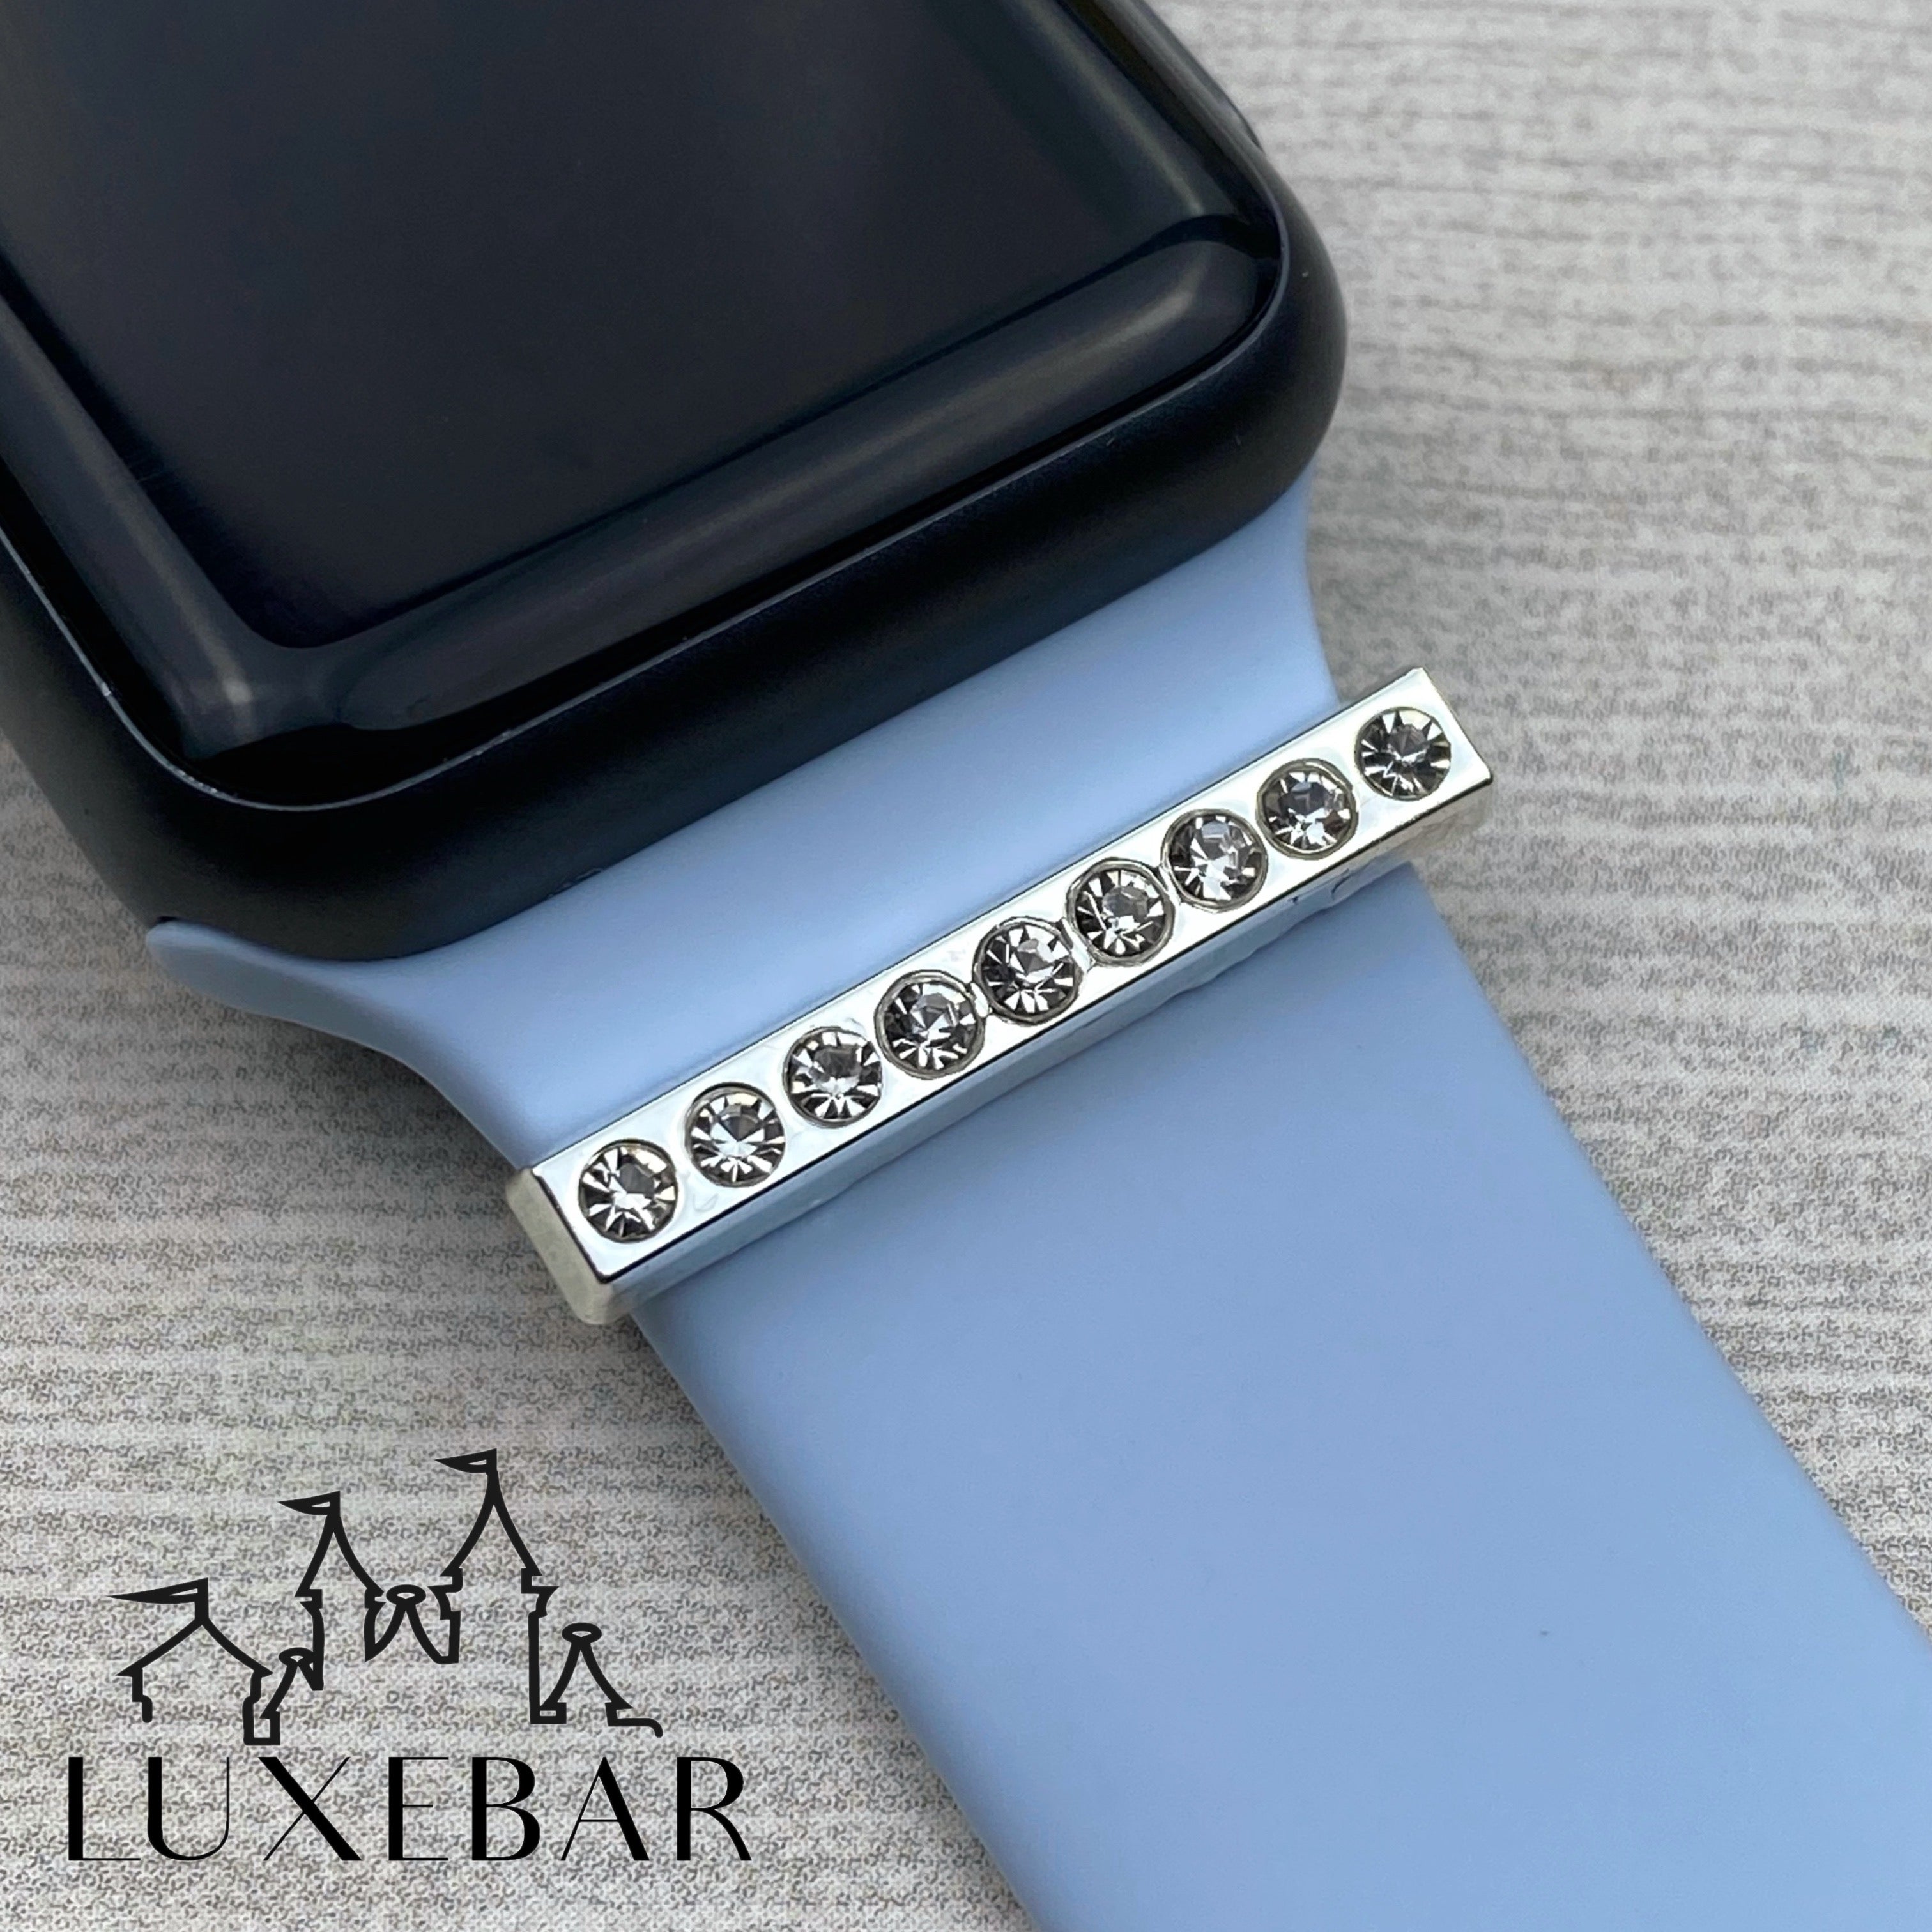 LuxeBar Sparkle ~ Silver Stacking Bars